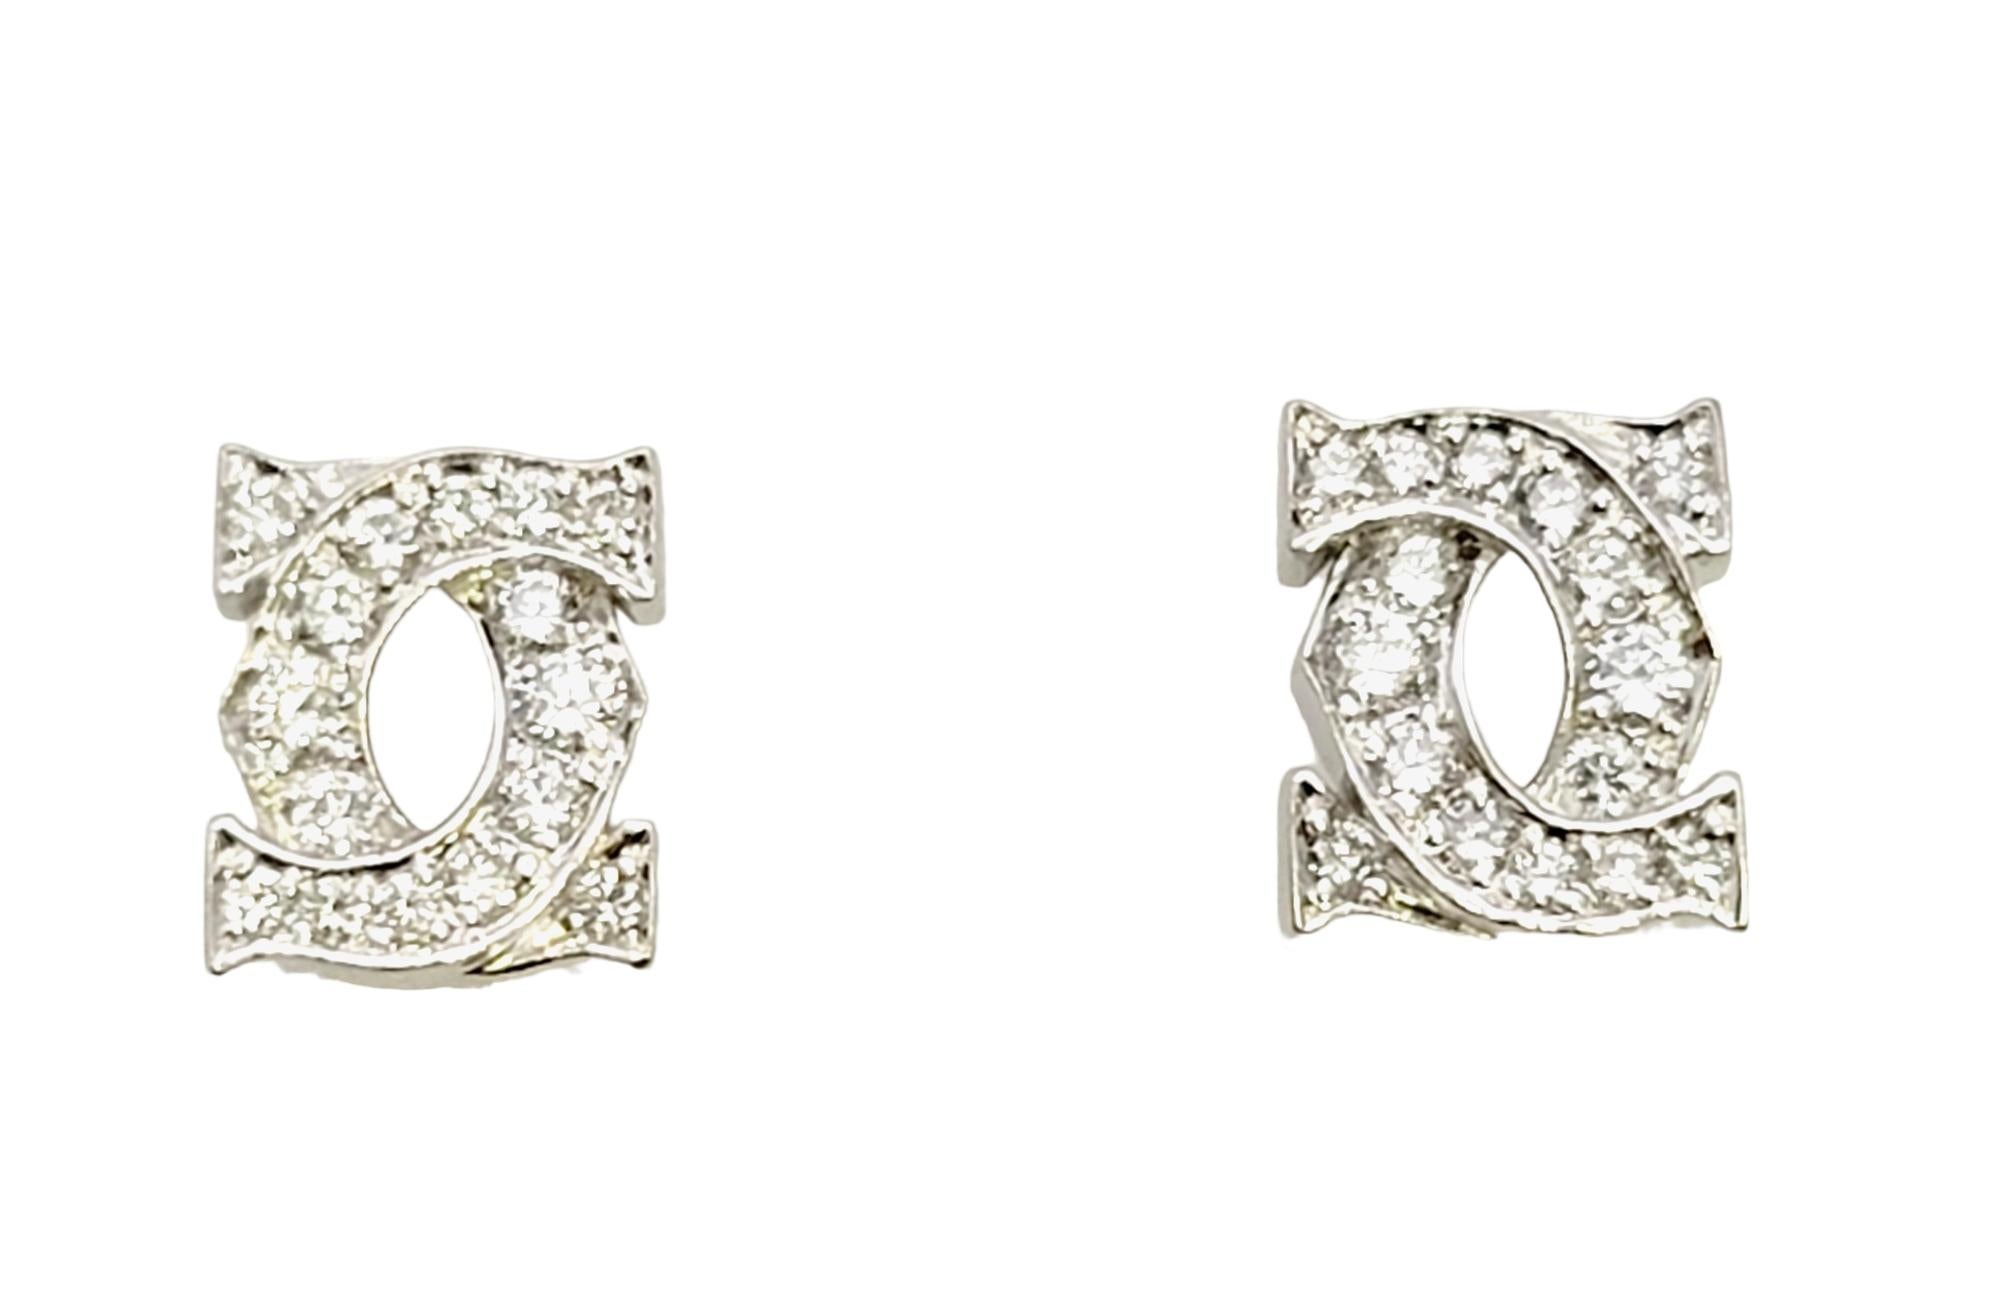 The perfect everyday stud earrings with a just a hint of shimmering sparkle. Cartier is a French high-end luxury goods company that designs, manufactures, distributes, and sells jewelry, leather goods, and watches. It was founded by Louis-François